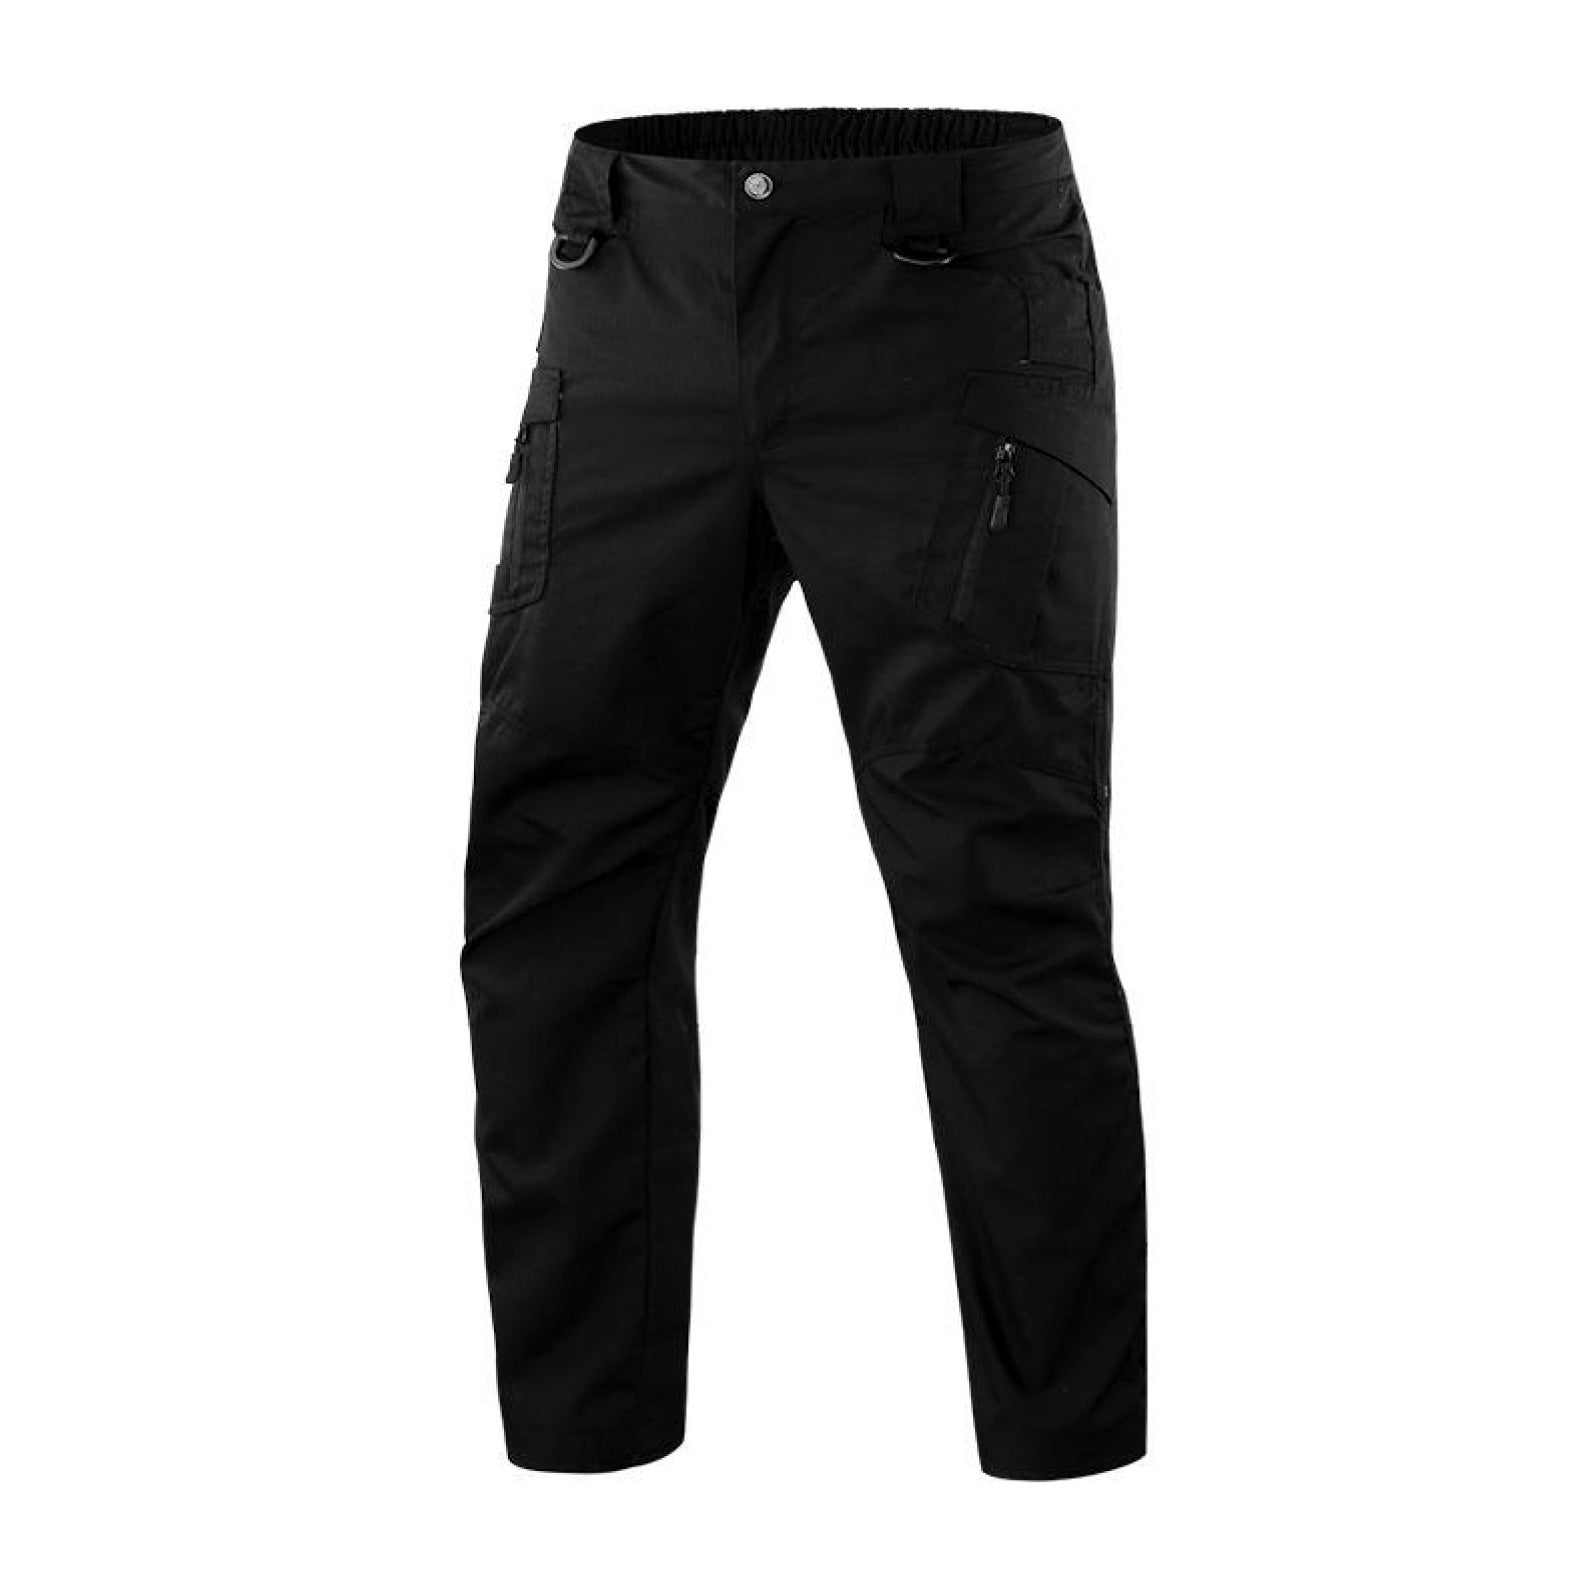 Military Basic - Tactical Cargo Pants (Slim Fit)